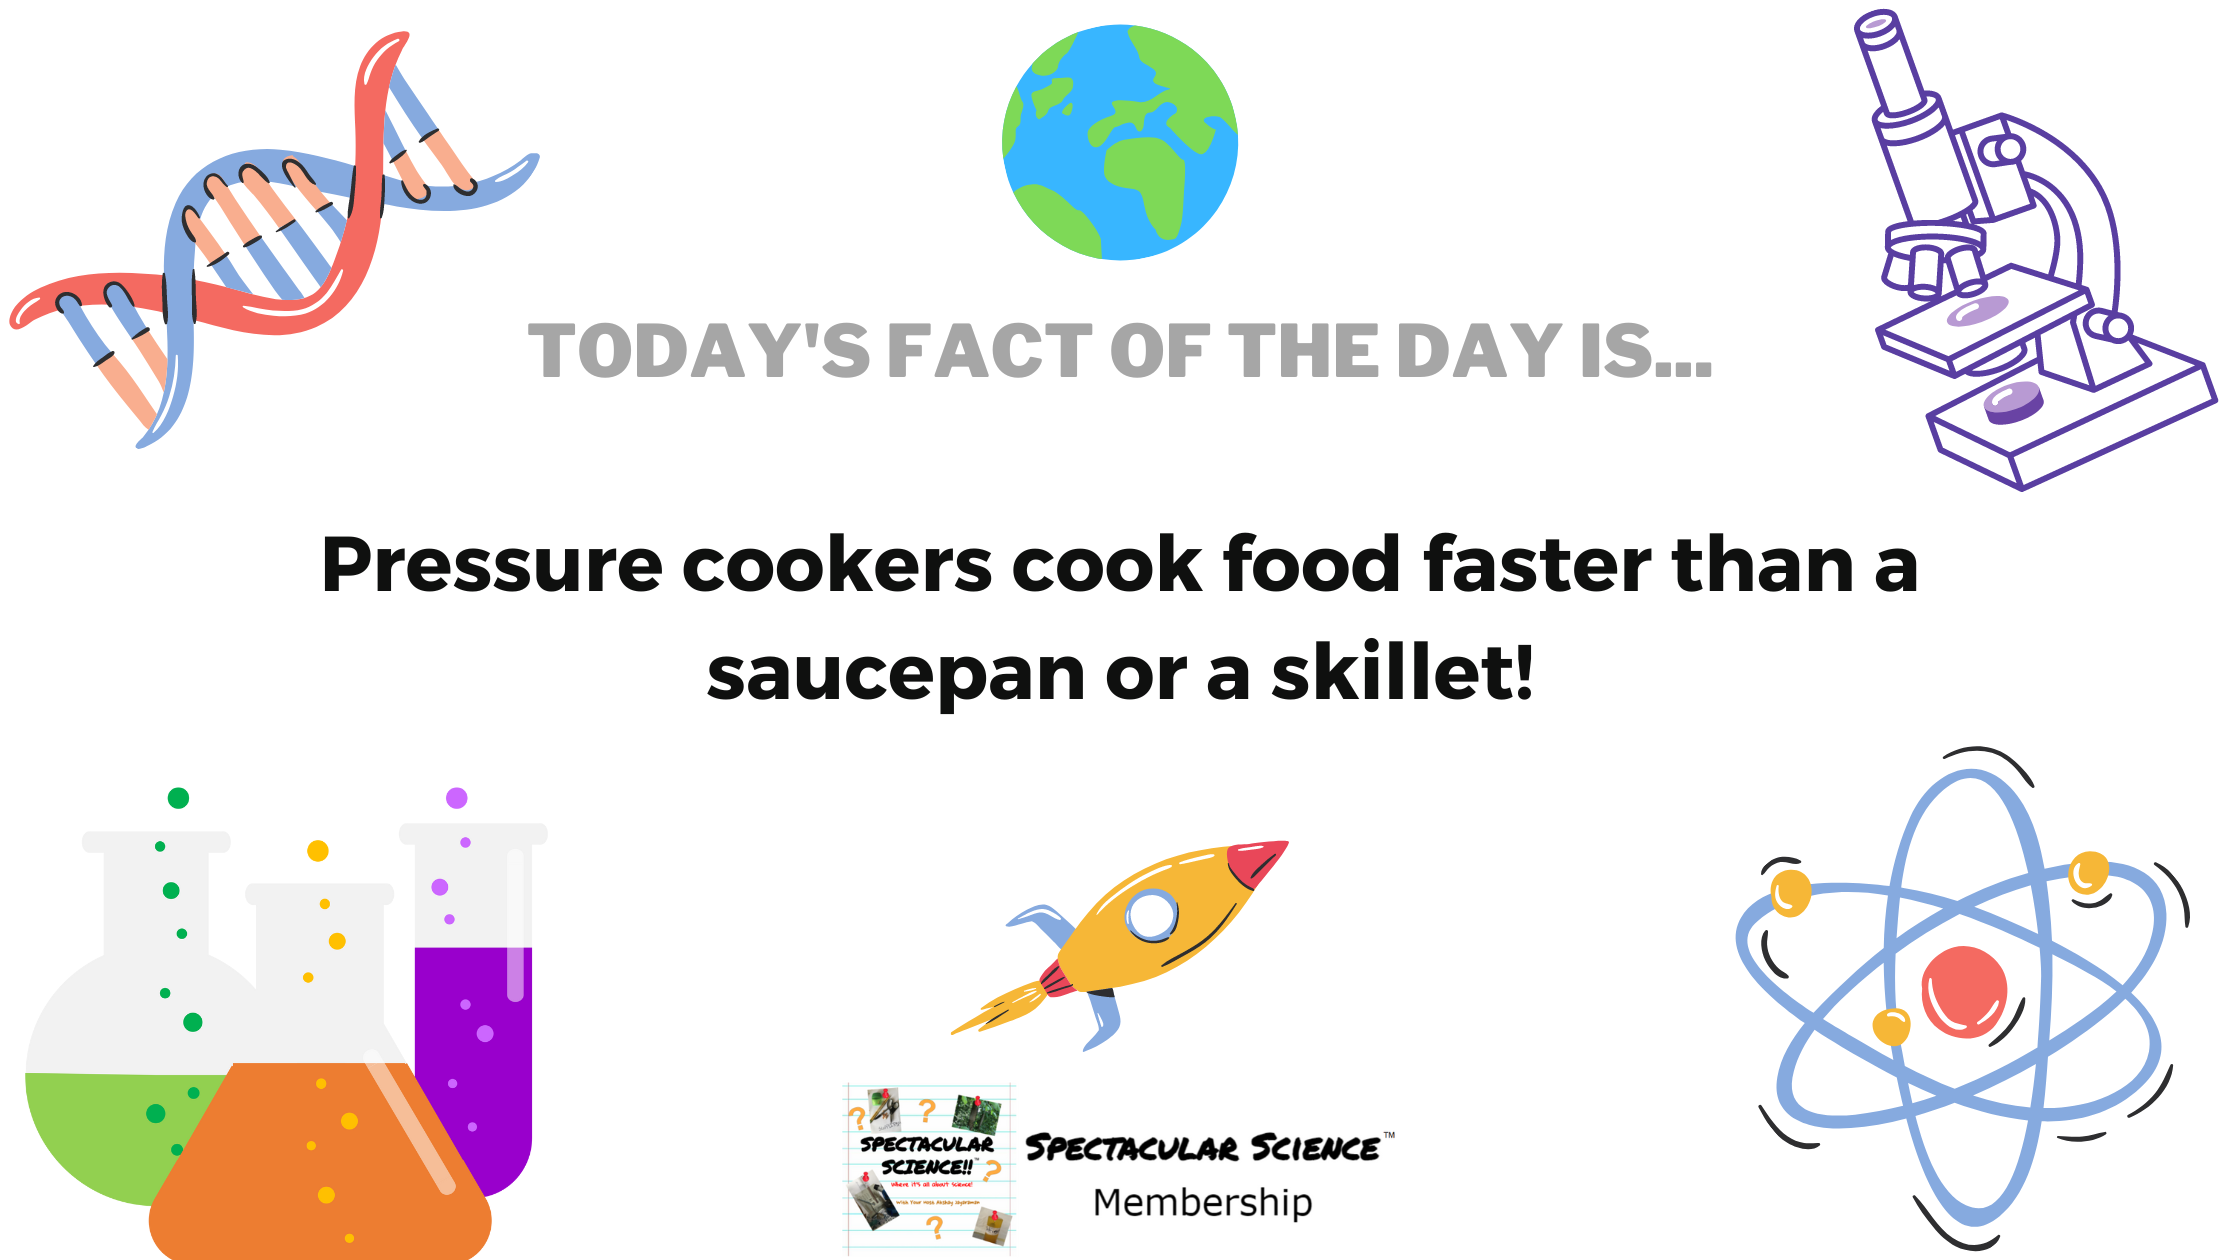 Fact of the Day Image July 23rd